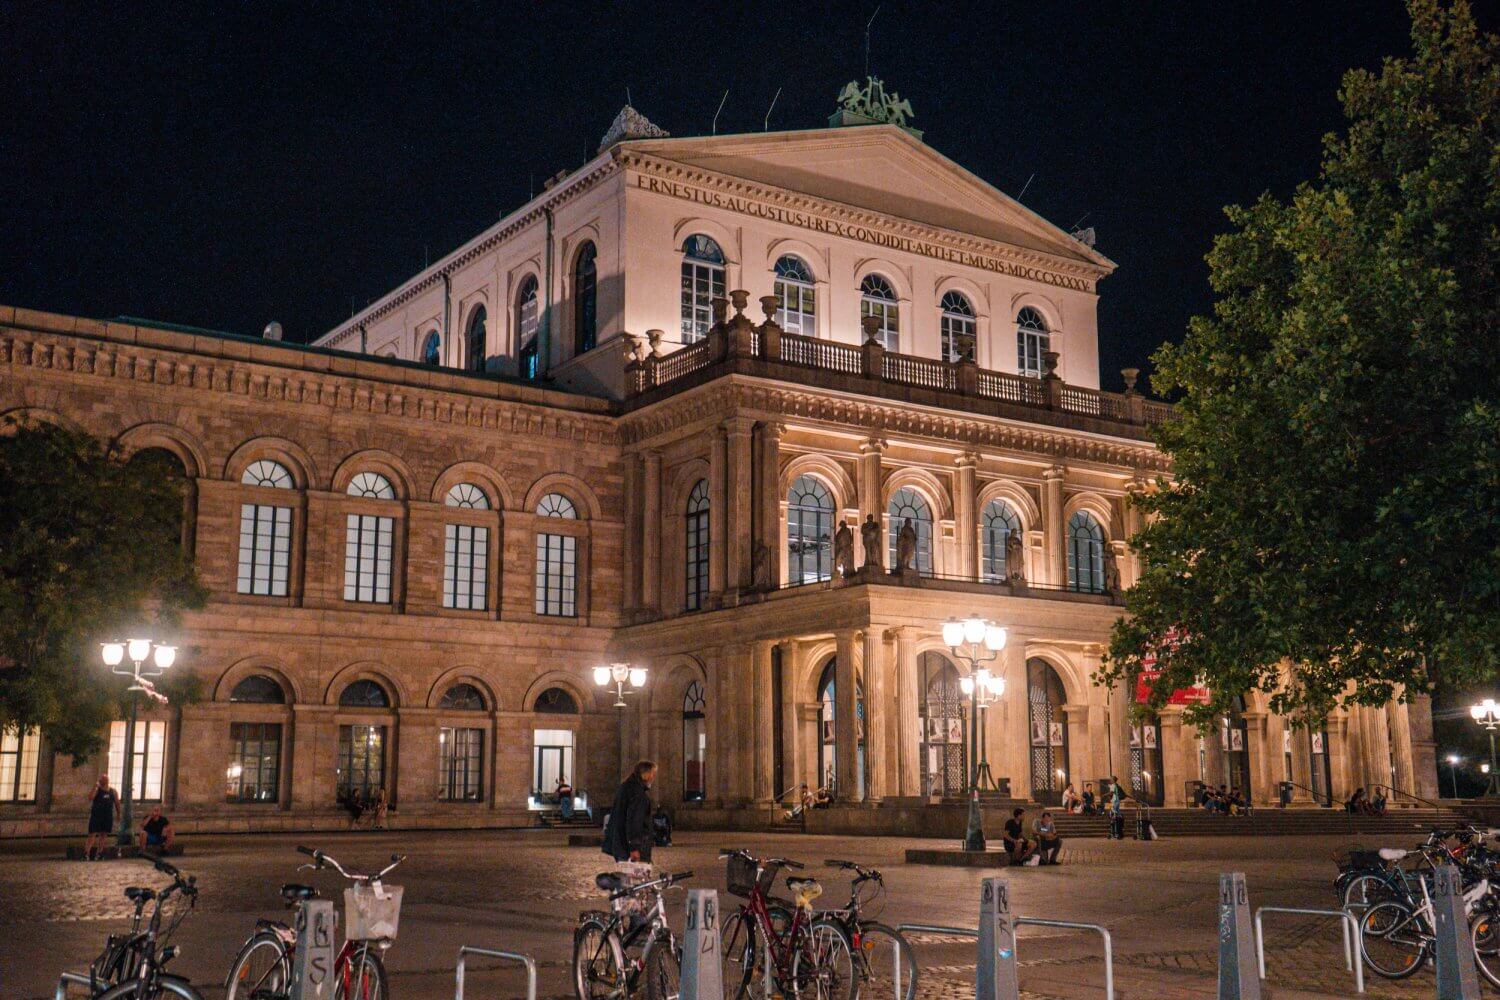 places to visit around hannover germany